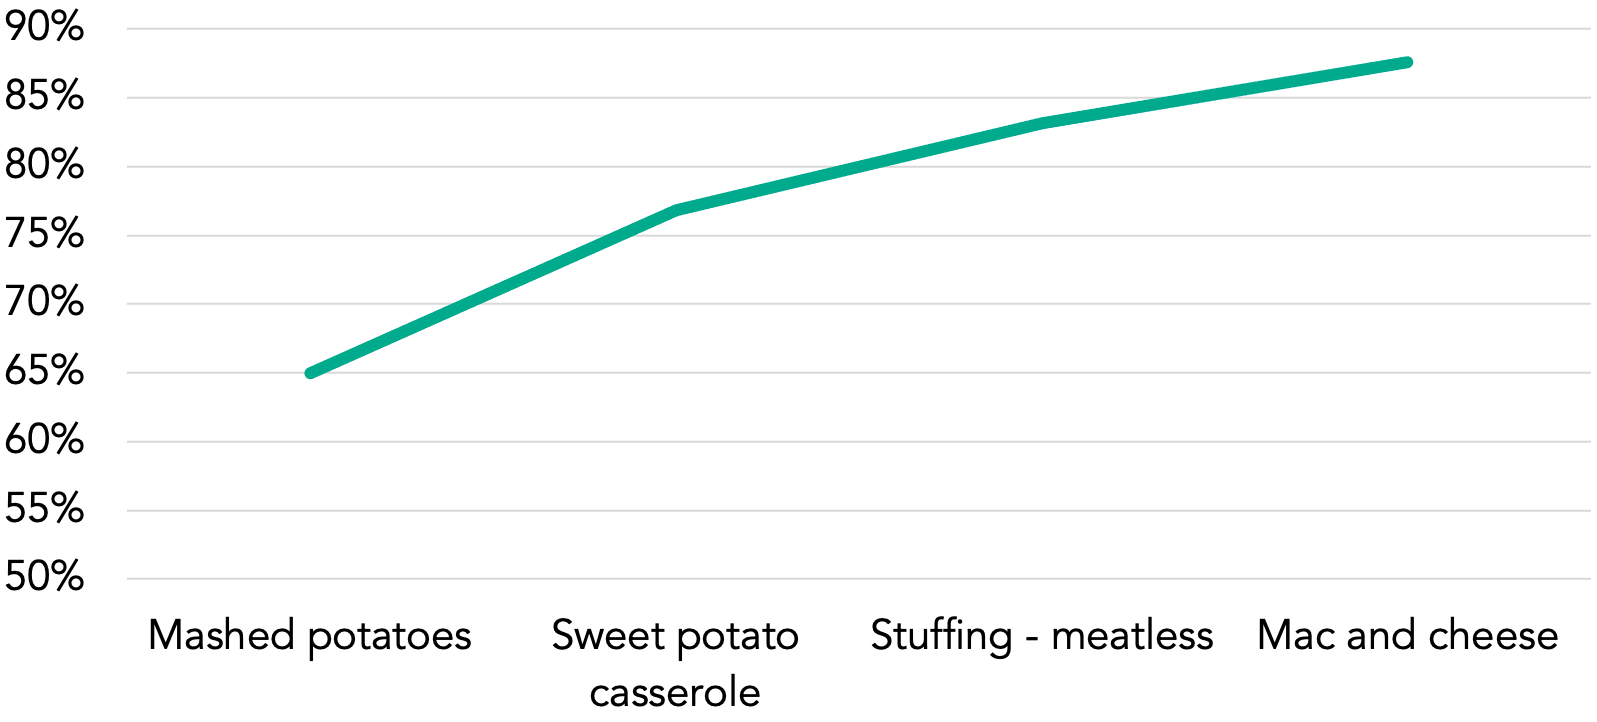 Line graph of the top Thanksgiving side dishes based on overall reach showing that almost 90% of guests would be happy with at least one of the following options: mashed potatoes, sweet potato casserole, meatless stuffing, or macaroni and cheese.